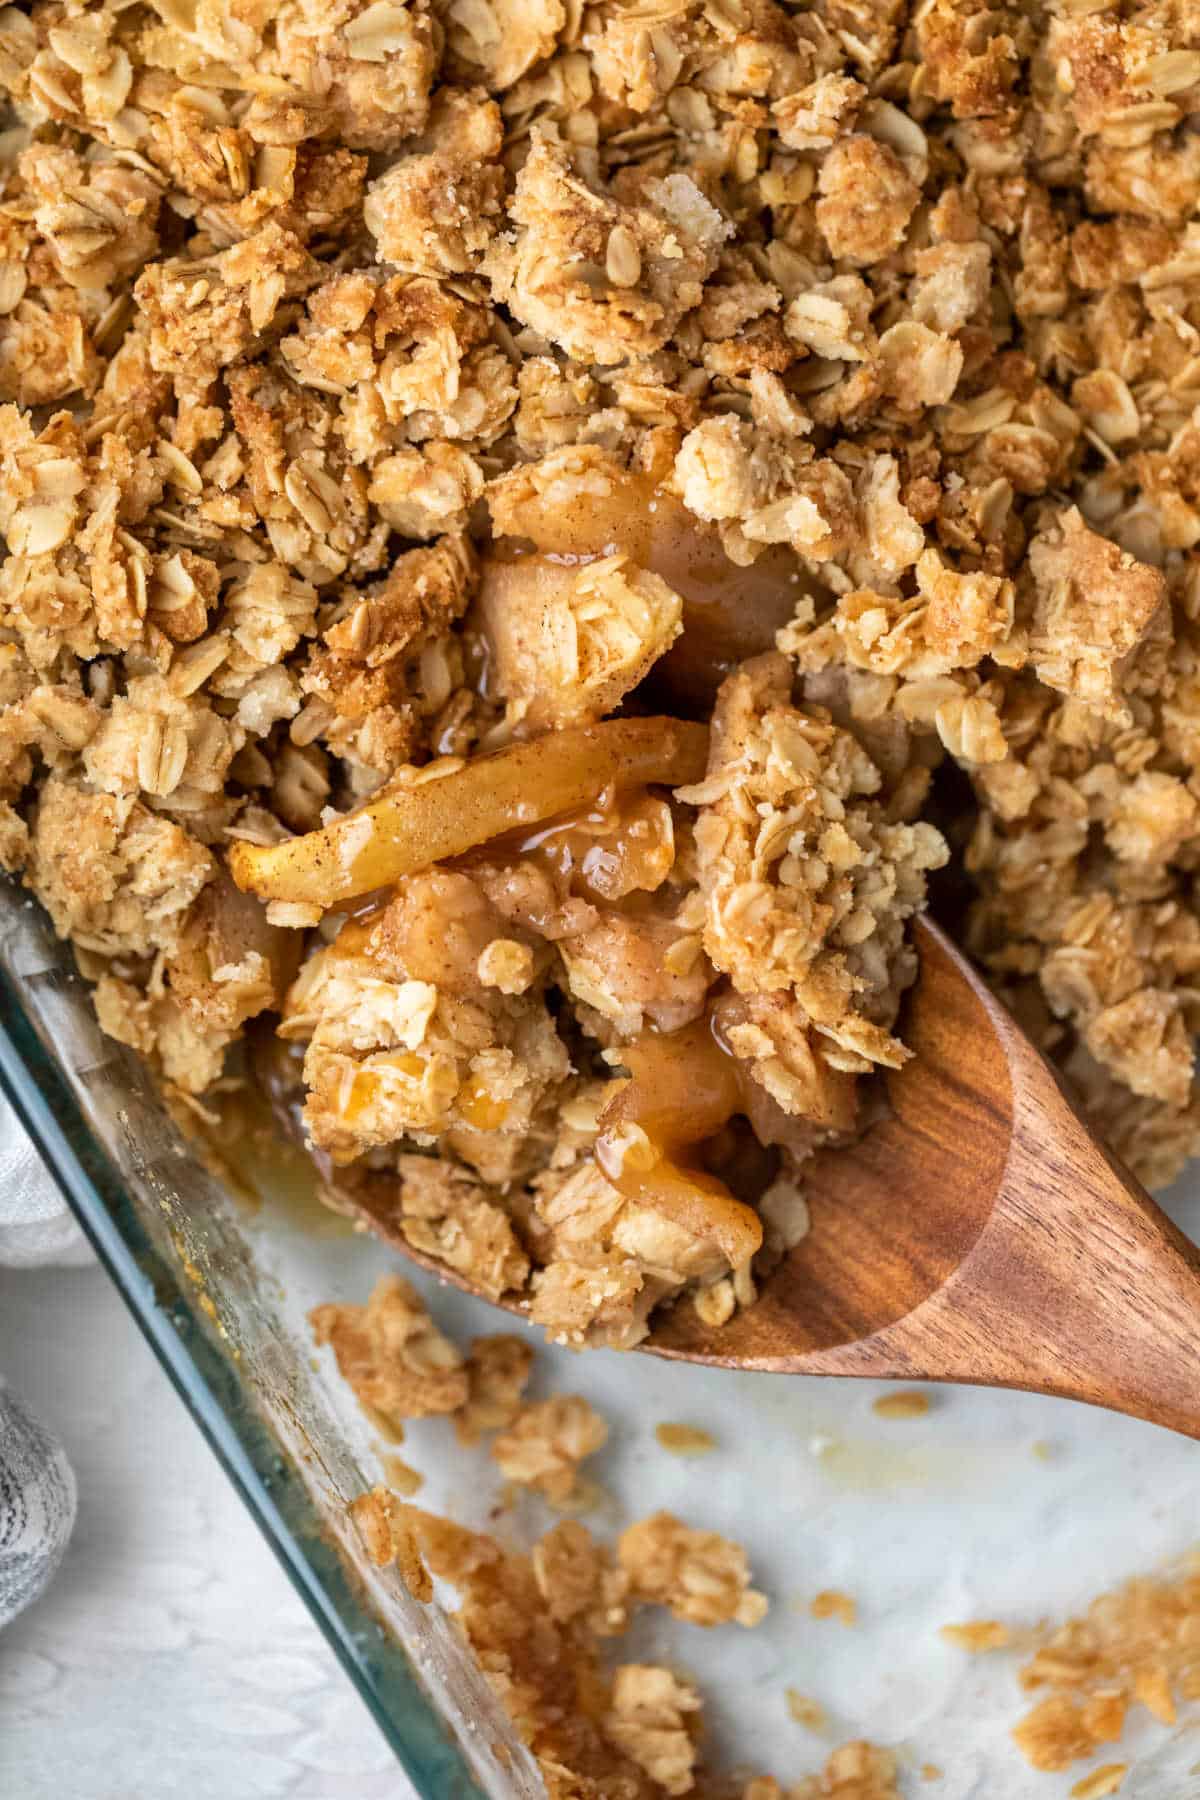 A wooden spoon scooping up apple crisp from a baking dish.